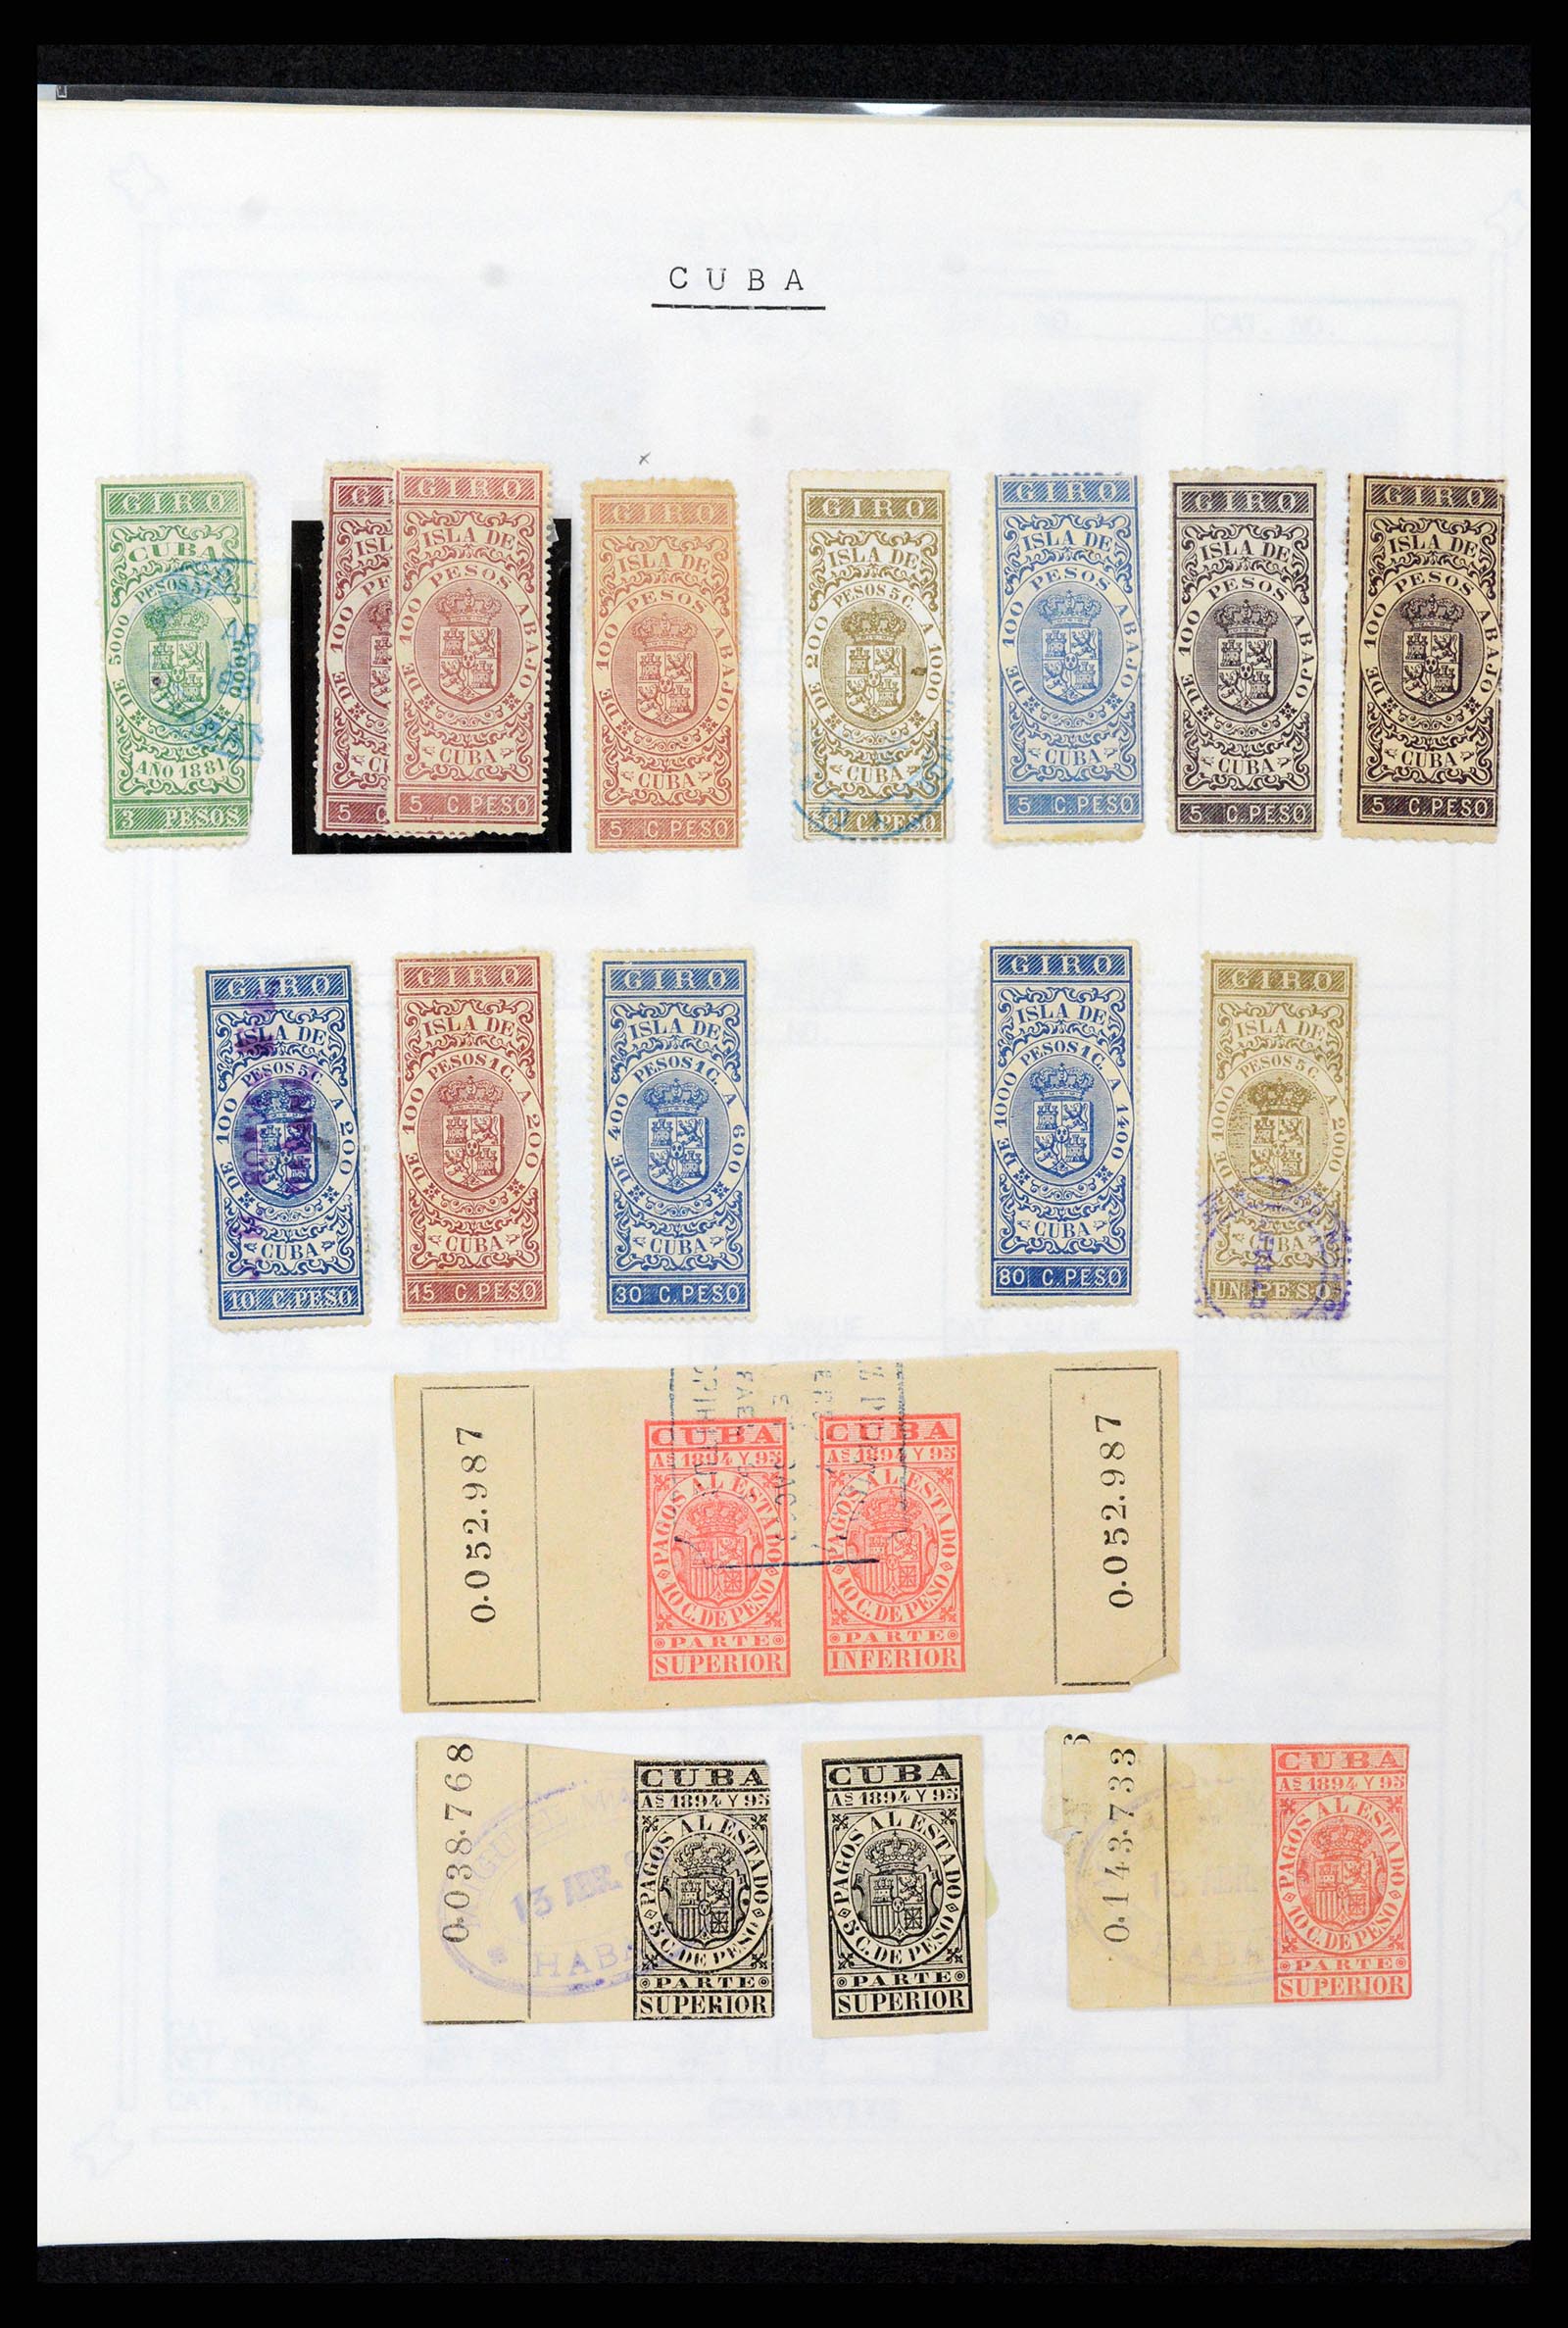 37228 742 - Stamp collection 37228 Cuba 1855-2009.